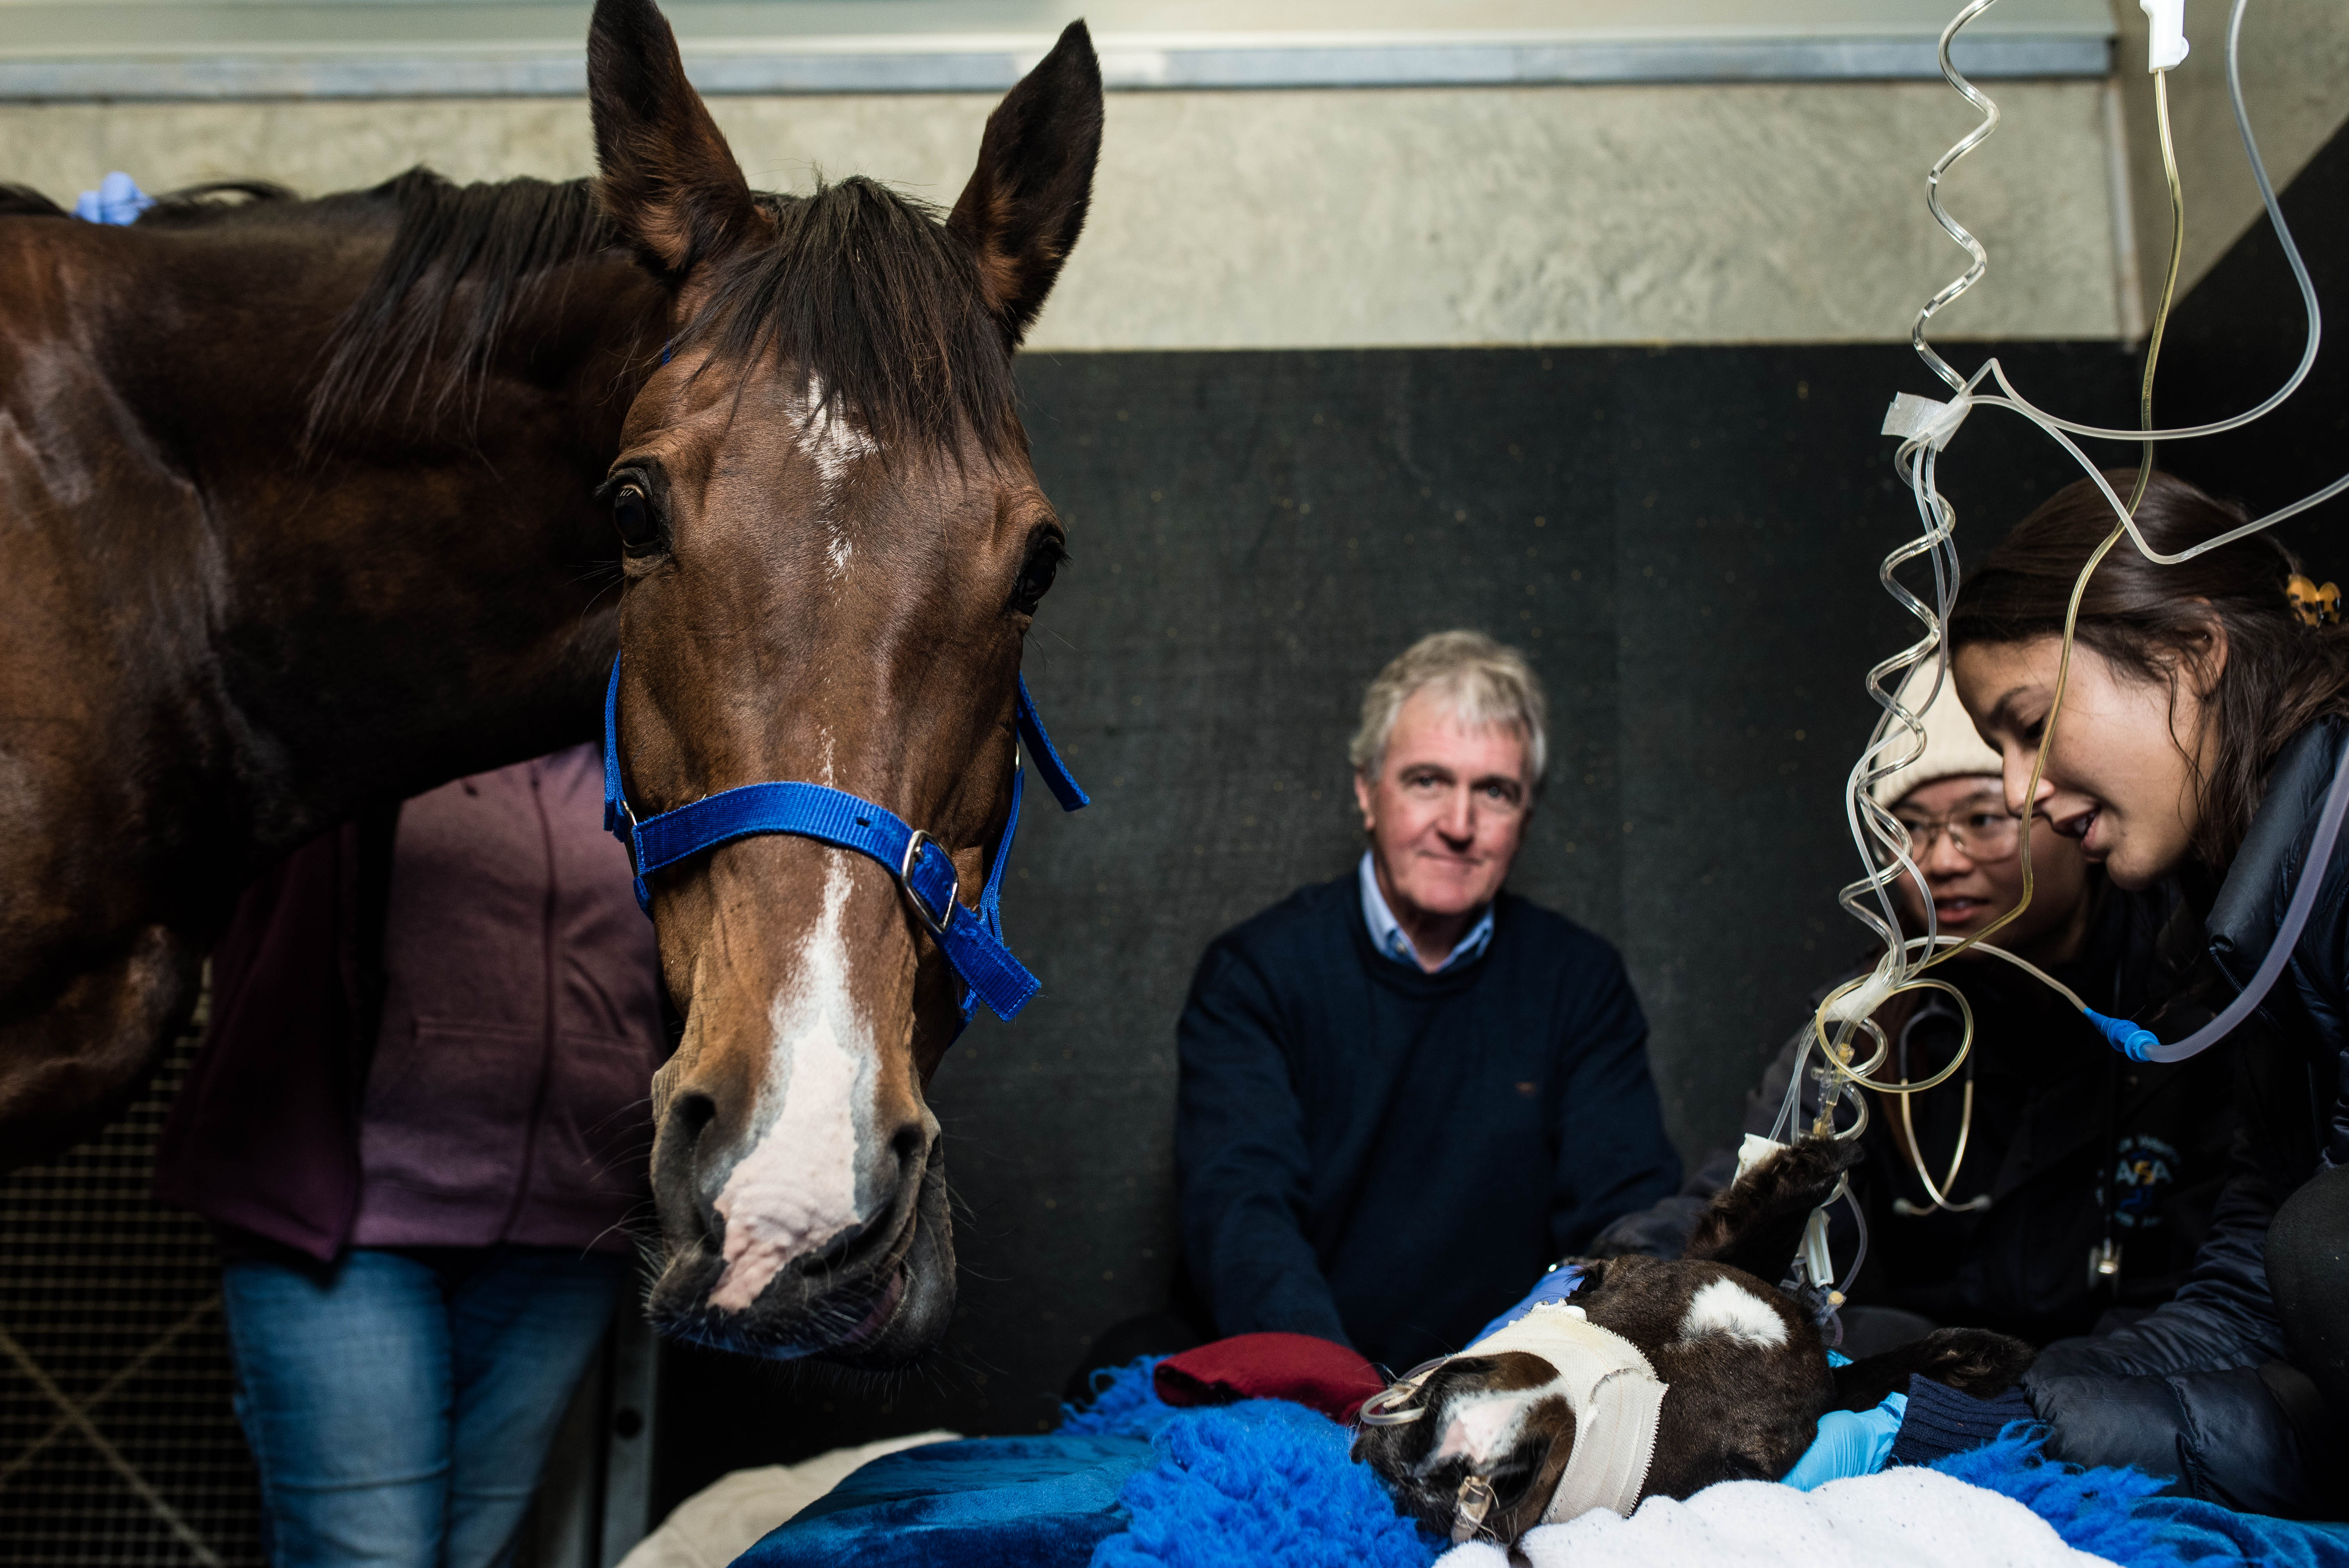 Professor Wayne Hein with final year students Suria Fabbri (front) and Jing Khuu (back) at the Equine Health and Performance Centre